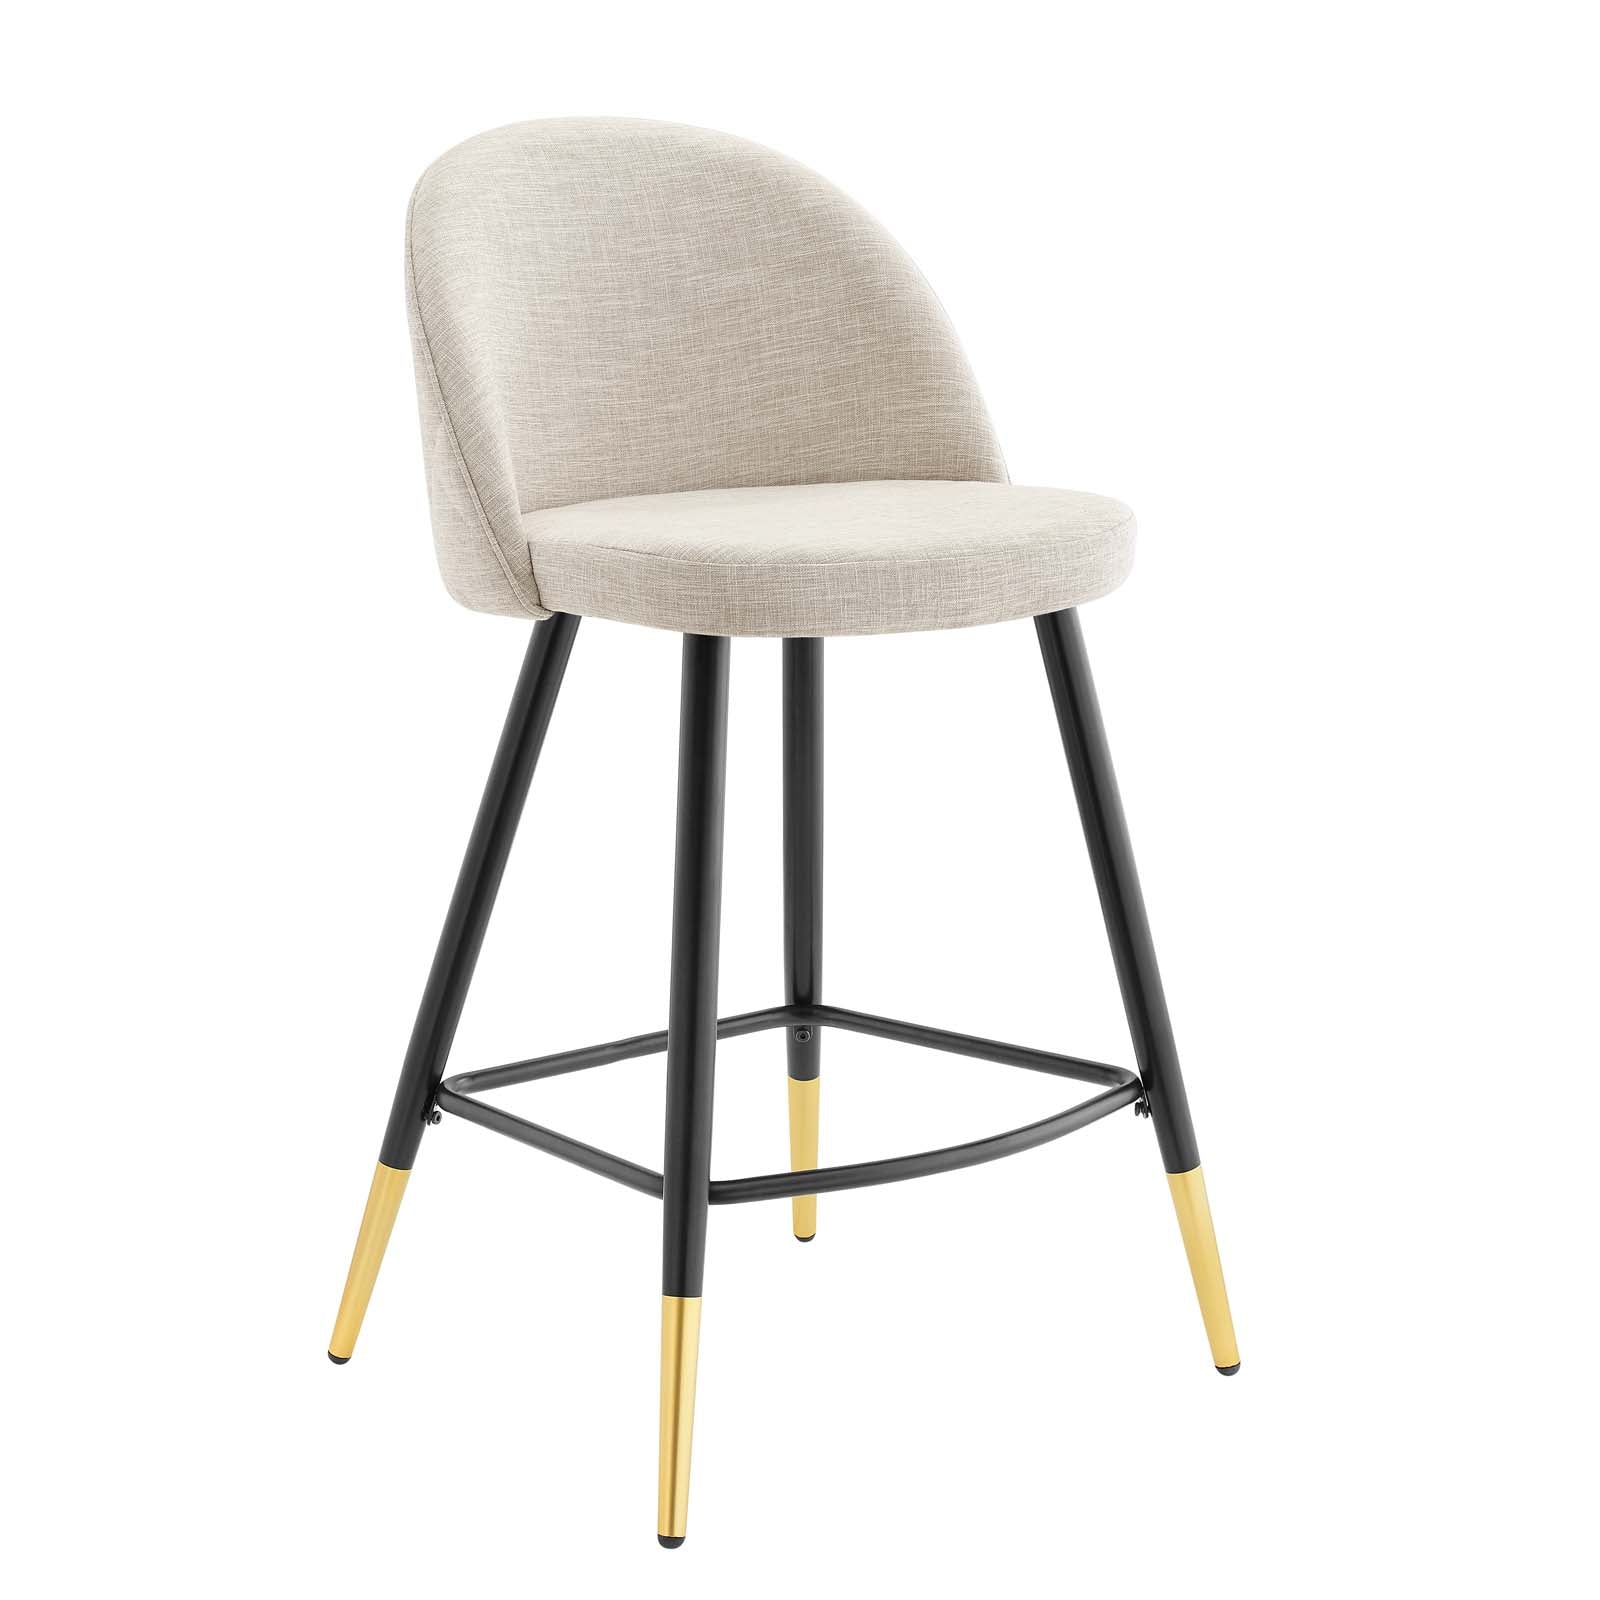 Modway Barstools - Cordial Fabric Counter Stools - ( Set of 2 ) Beige